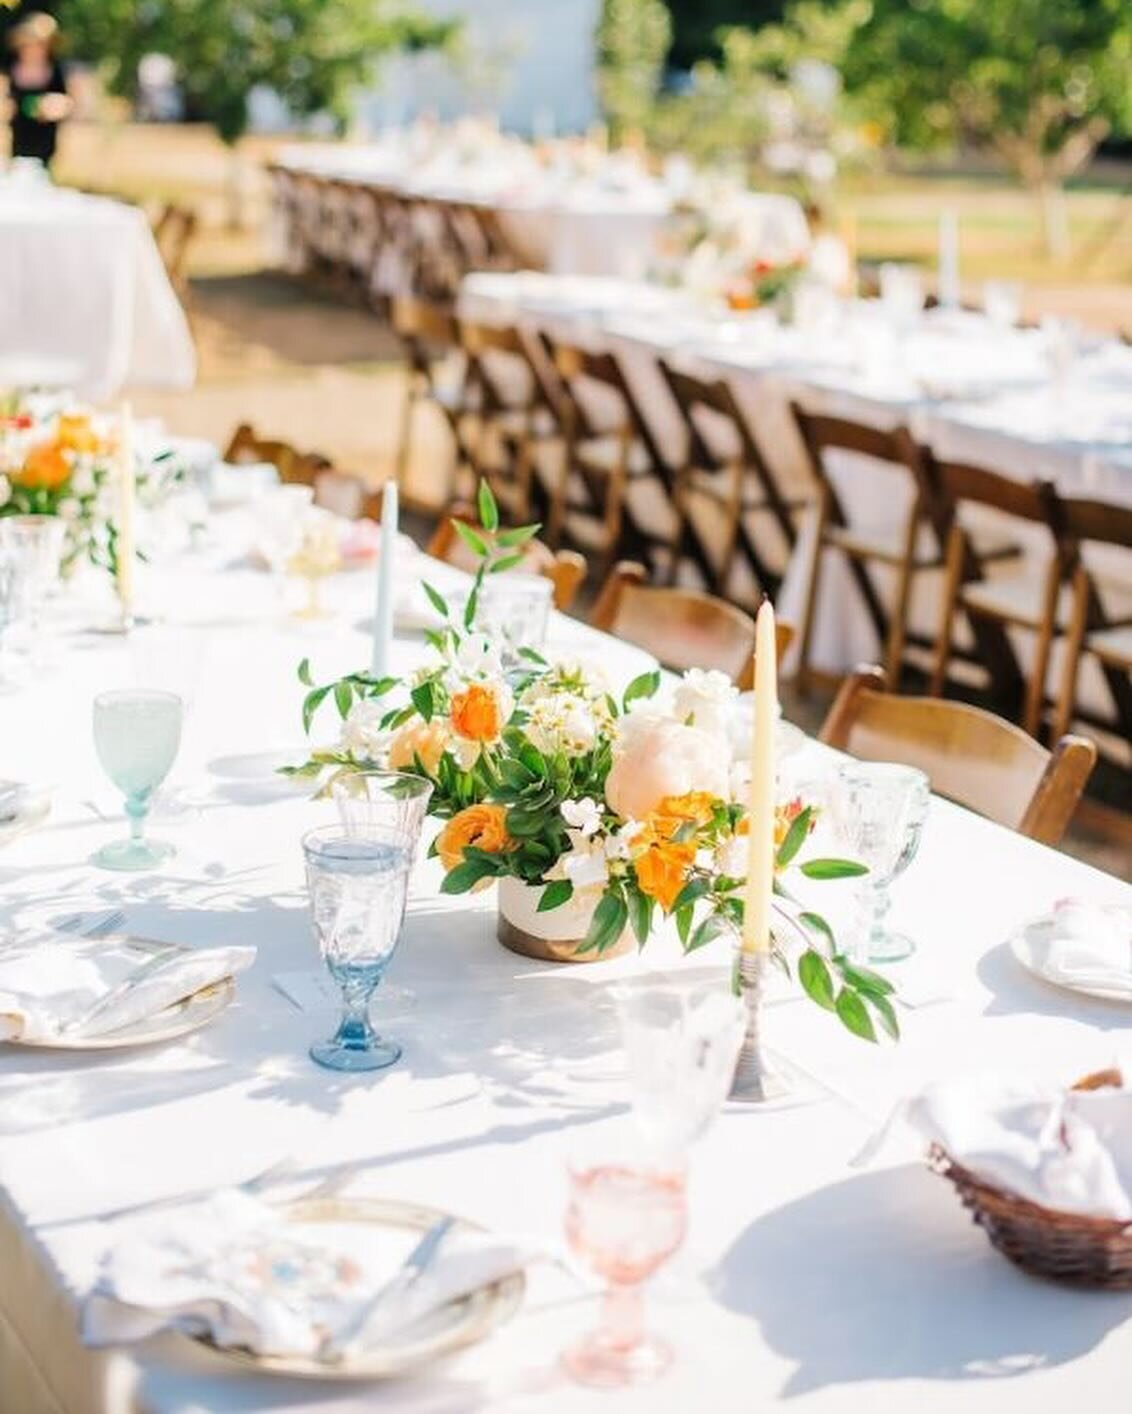 Beautiful Spring colors and sunshine for this Ojai wedding with @whitesageevents + @cararobbinsstudio! 

#ojaiwedding #summerwedding #805wedding #ojai #vintagechina